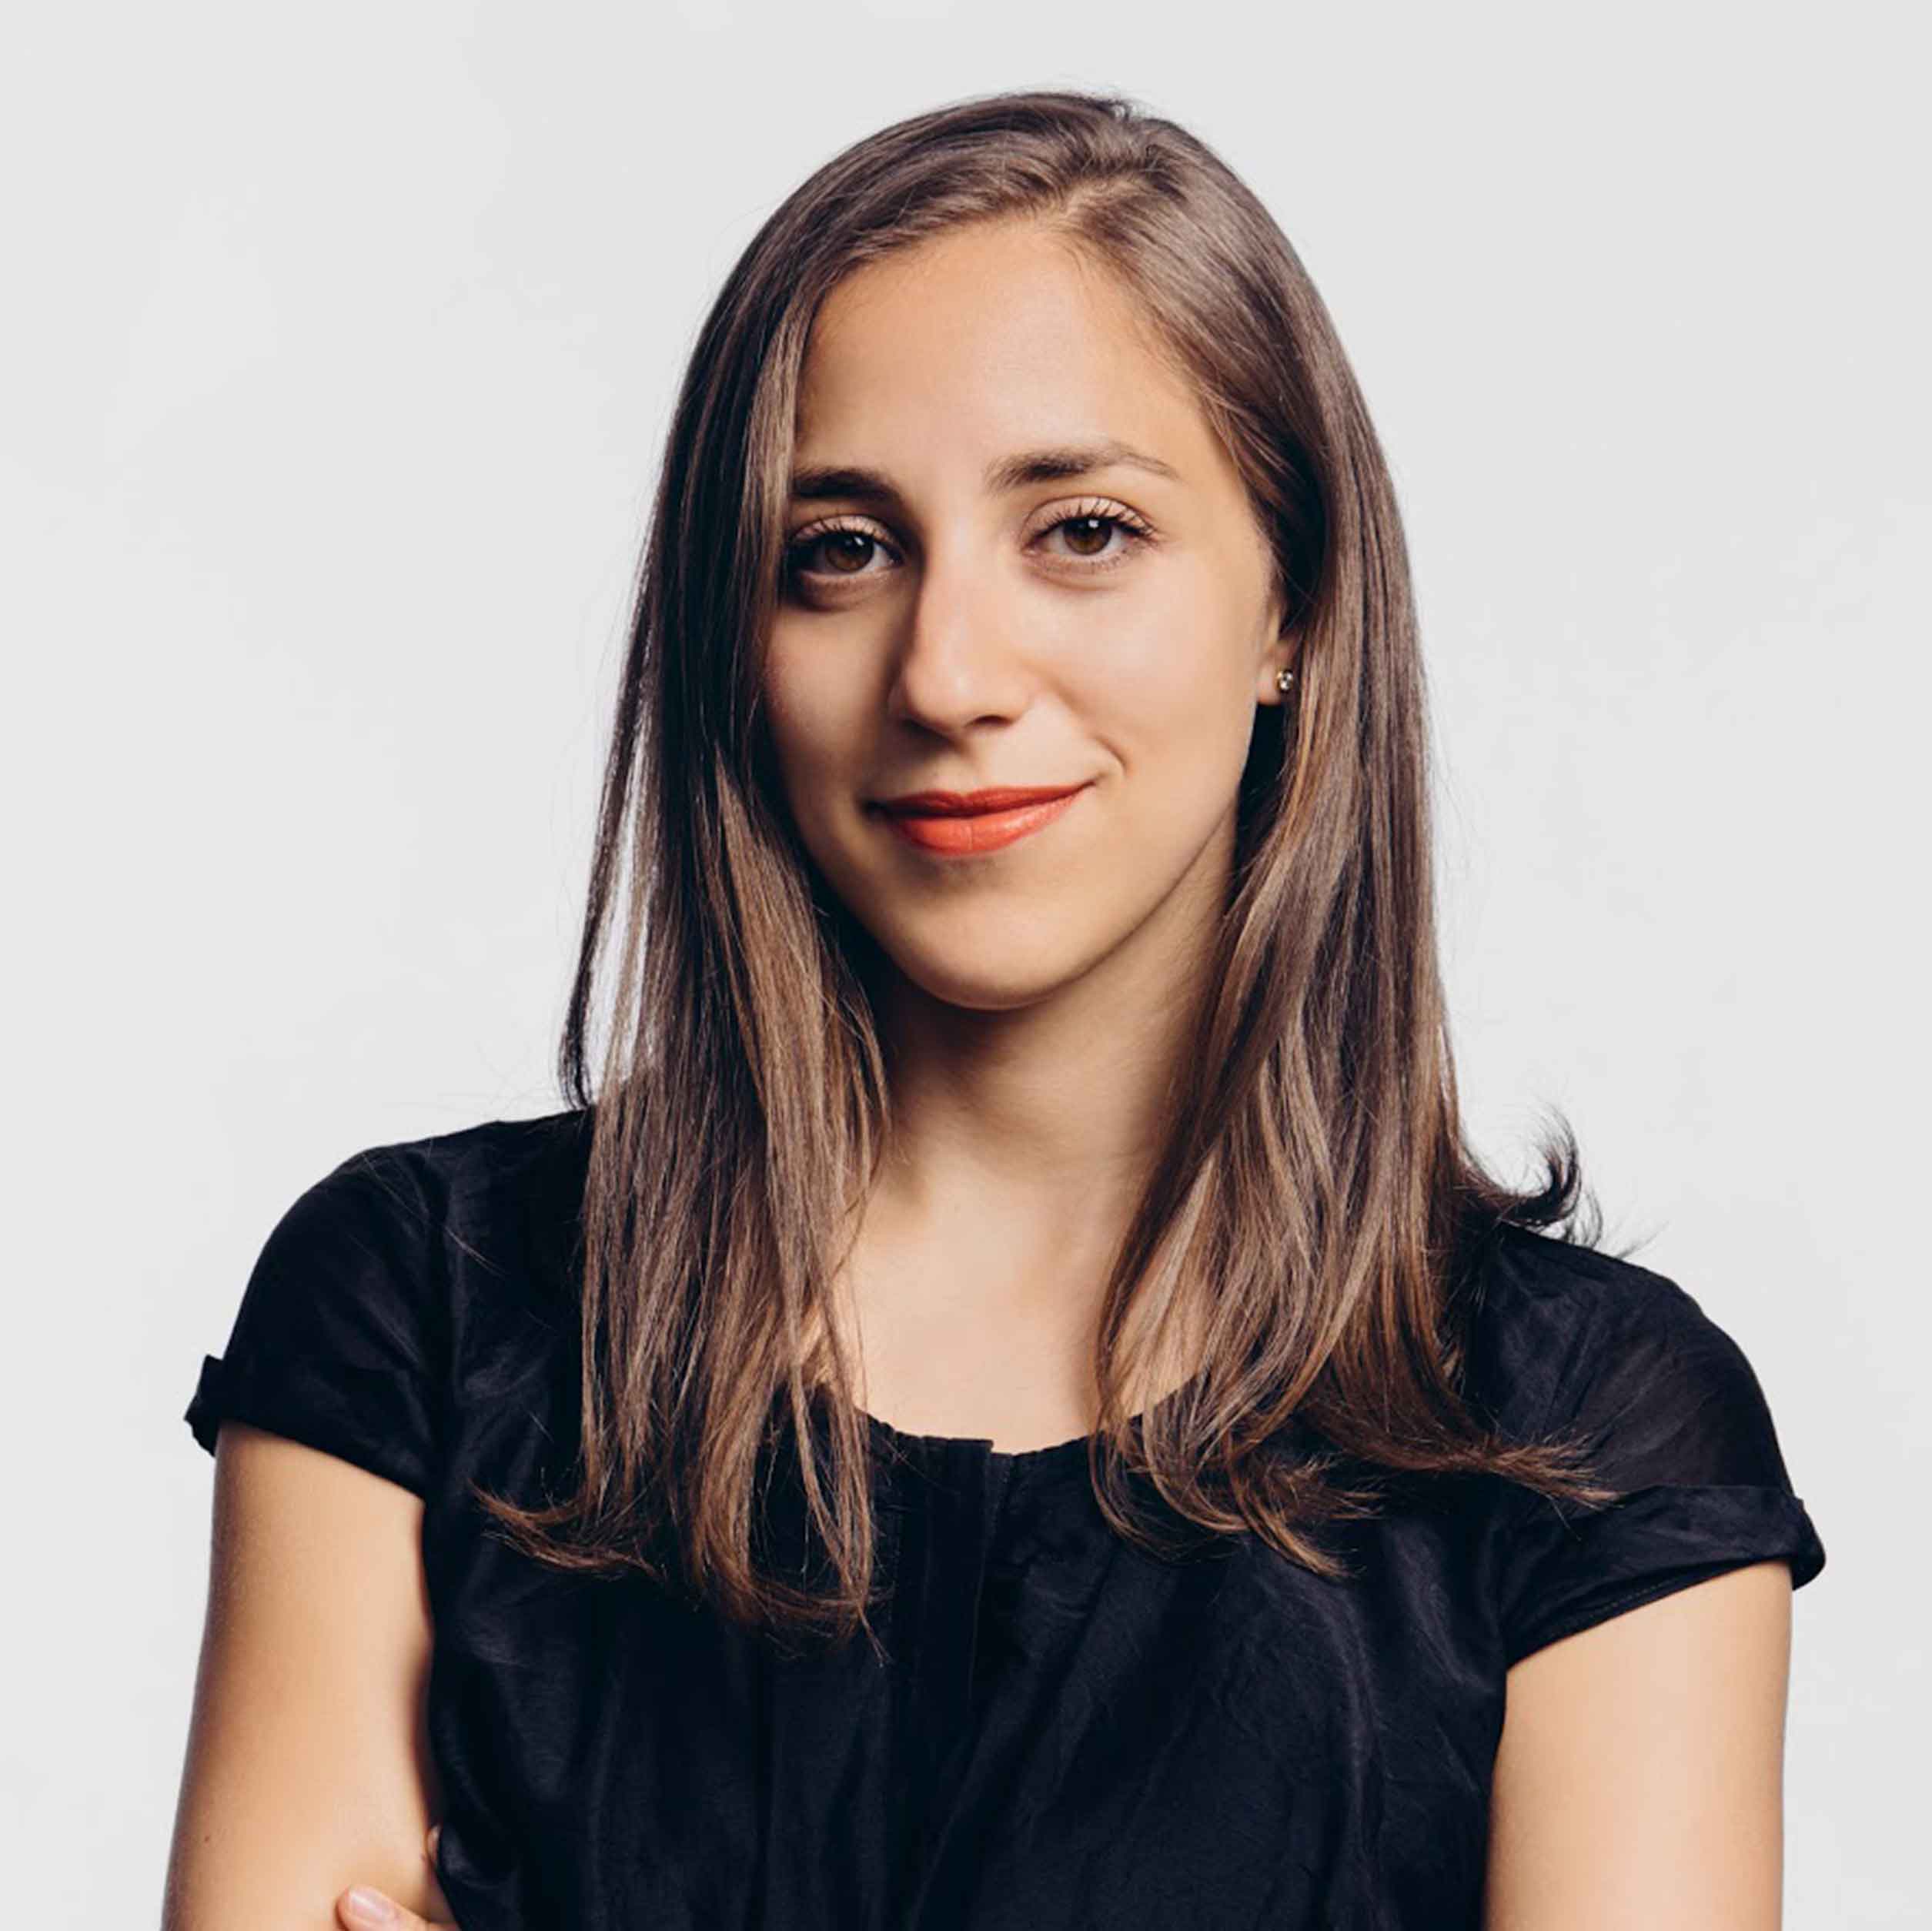 Interview with Natalie Gibralter from Squarespace - 100 Product Managers